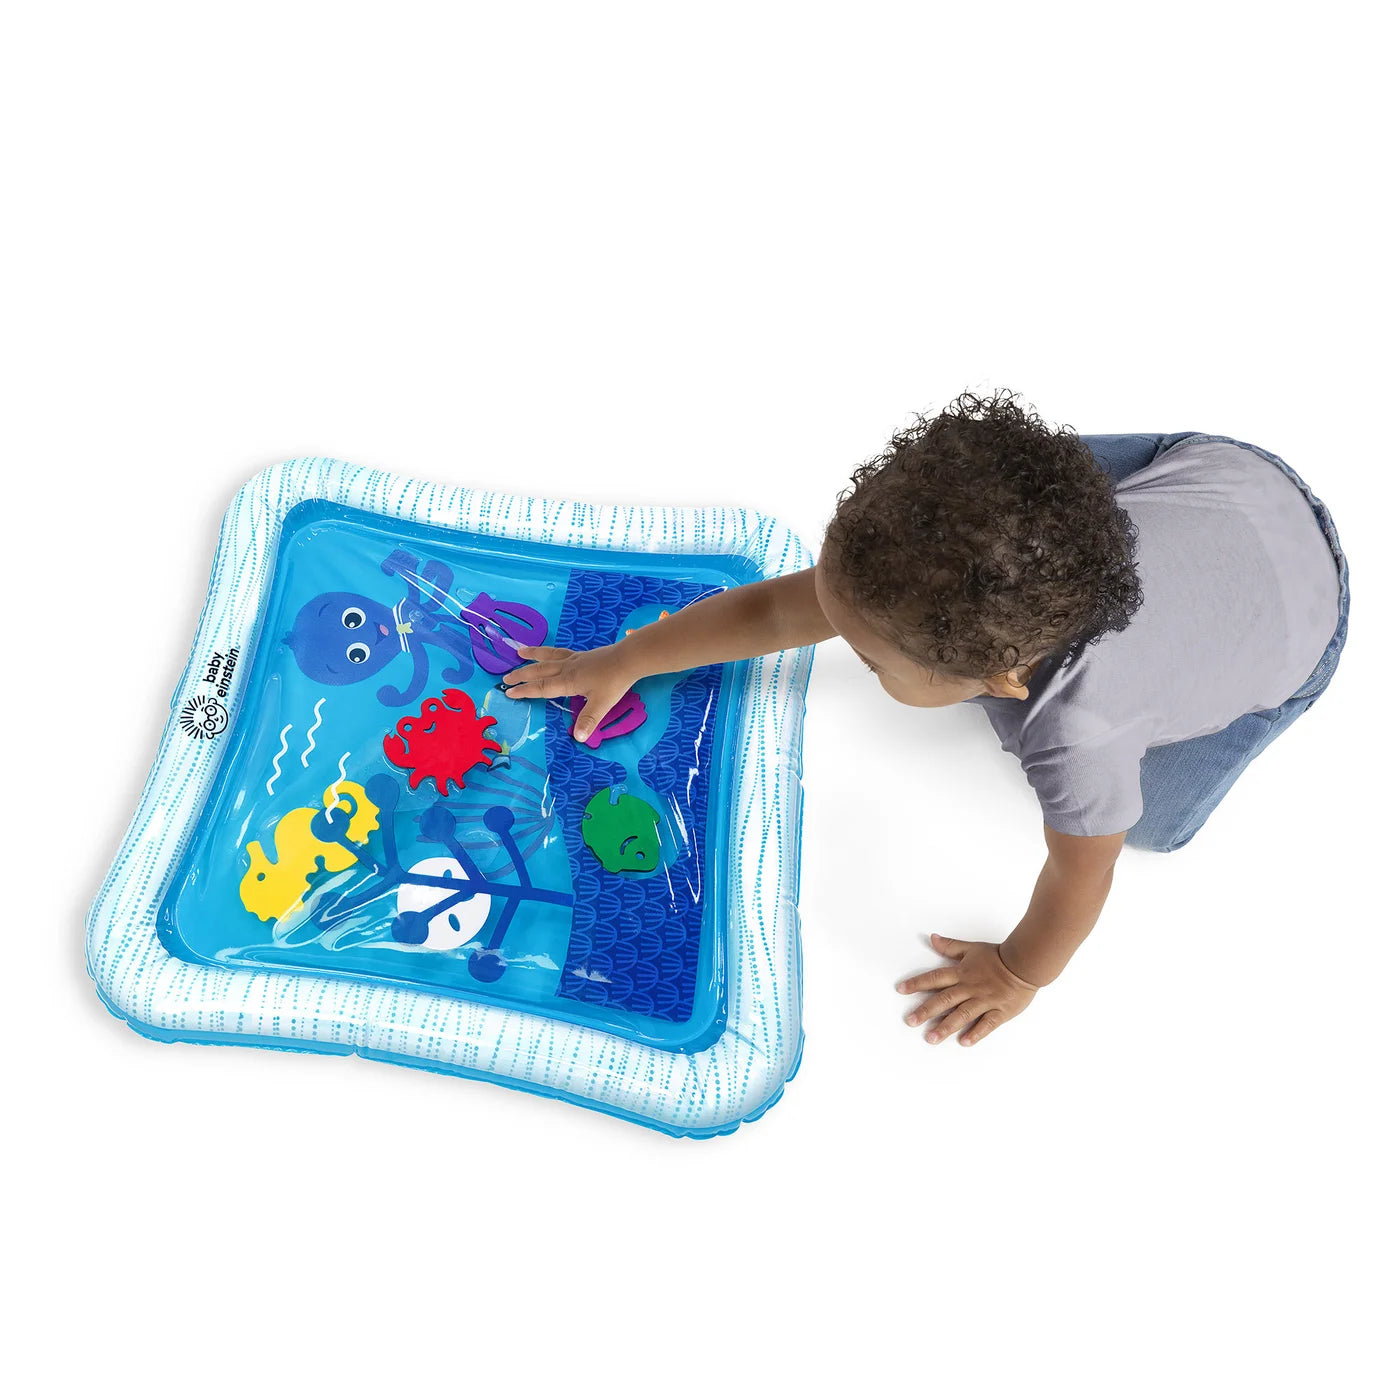 Tummy Time Baby Einstein - Ocean of Discovery Water Mat